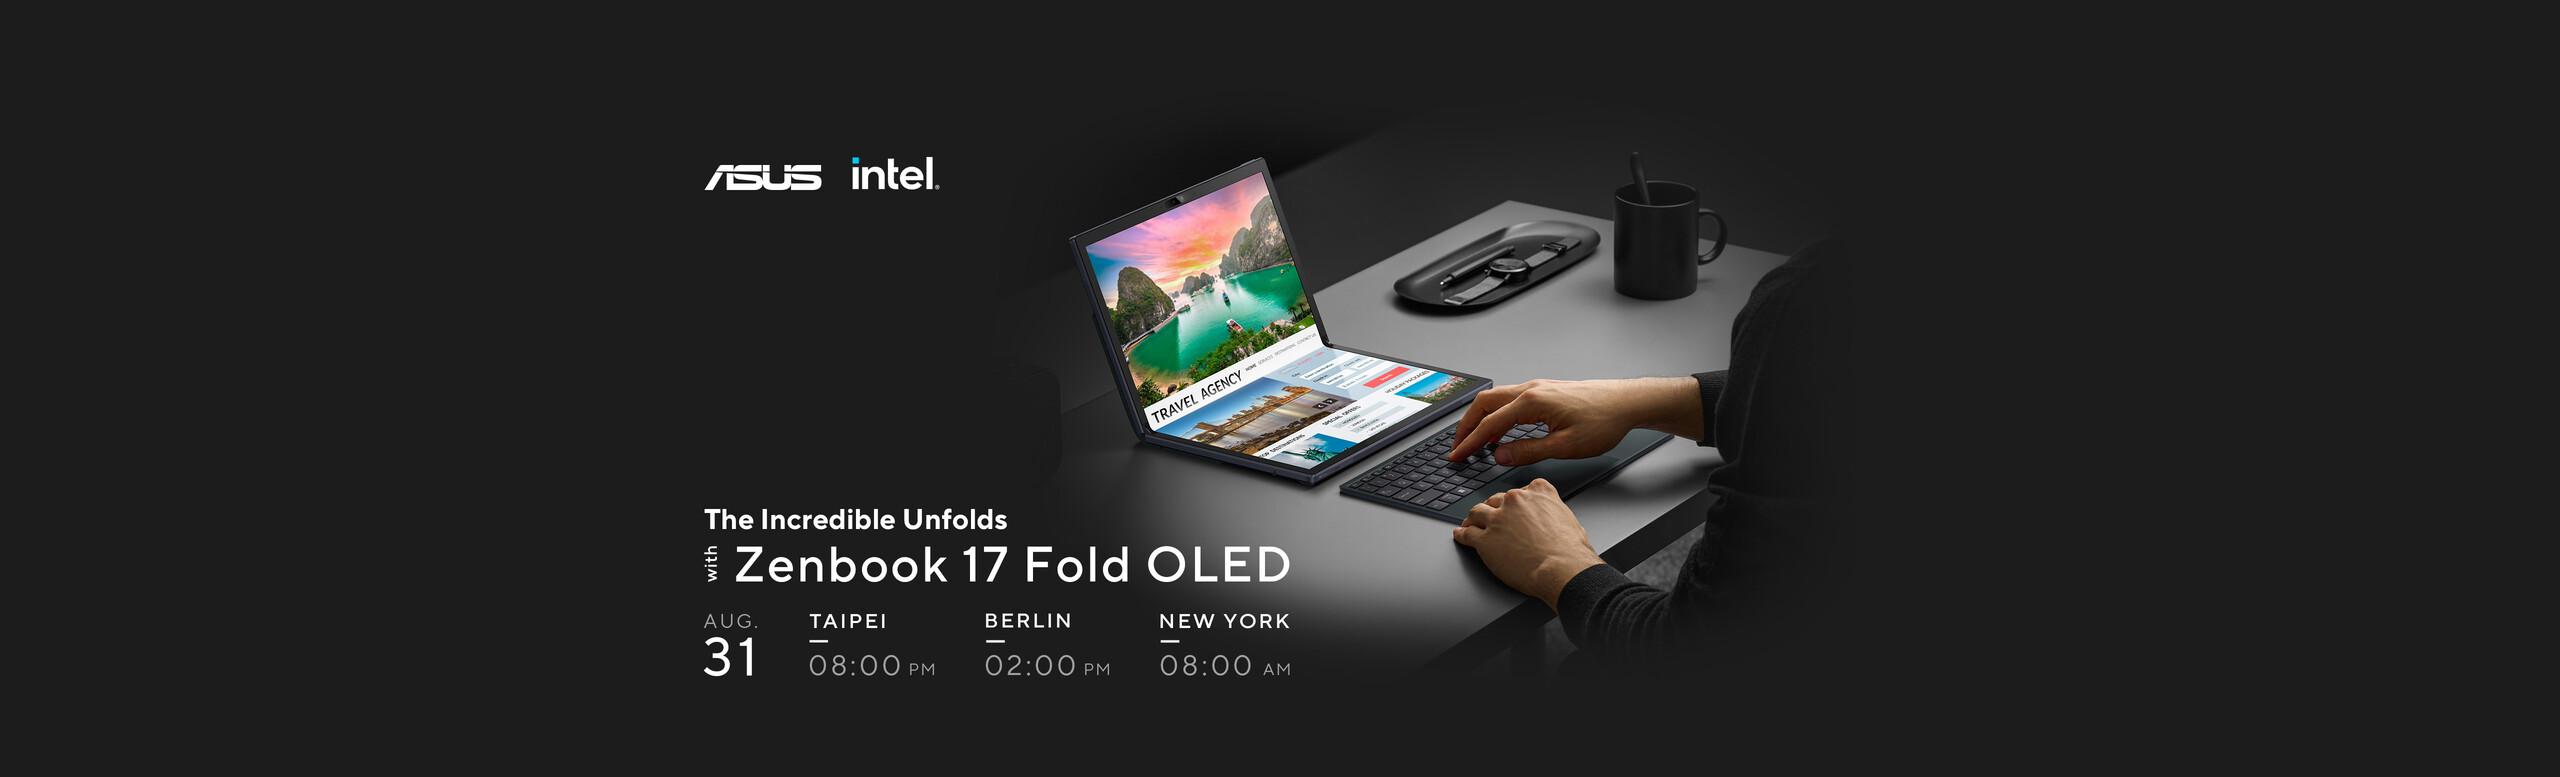 The Incredible Unfolds with Zenbook 17 Fold OLED